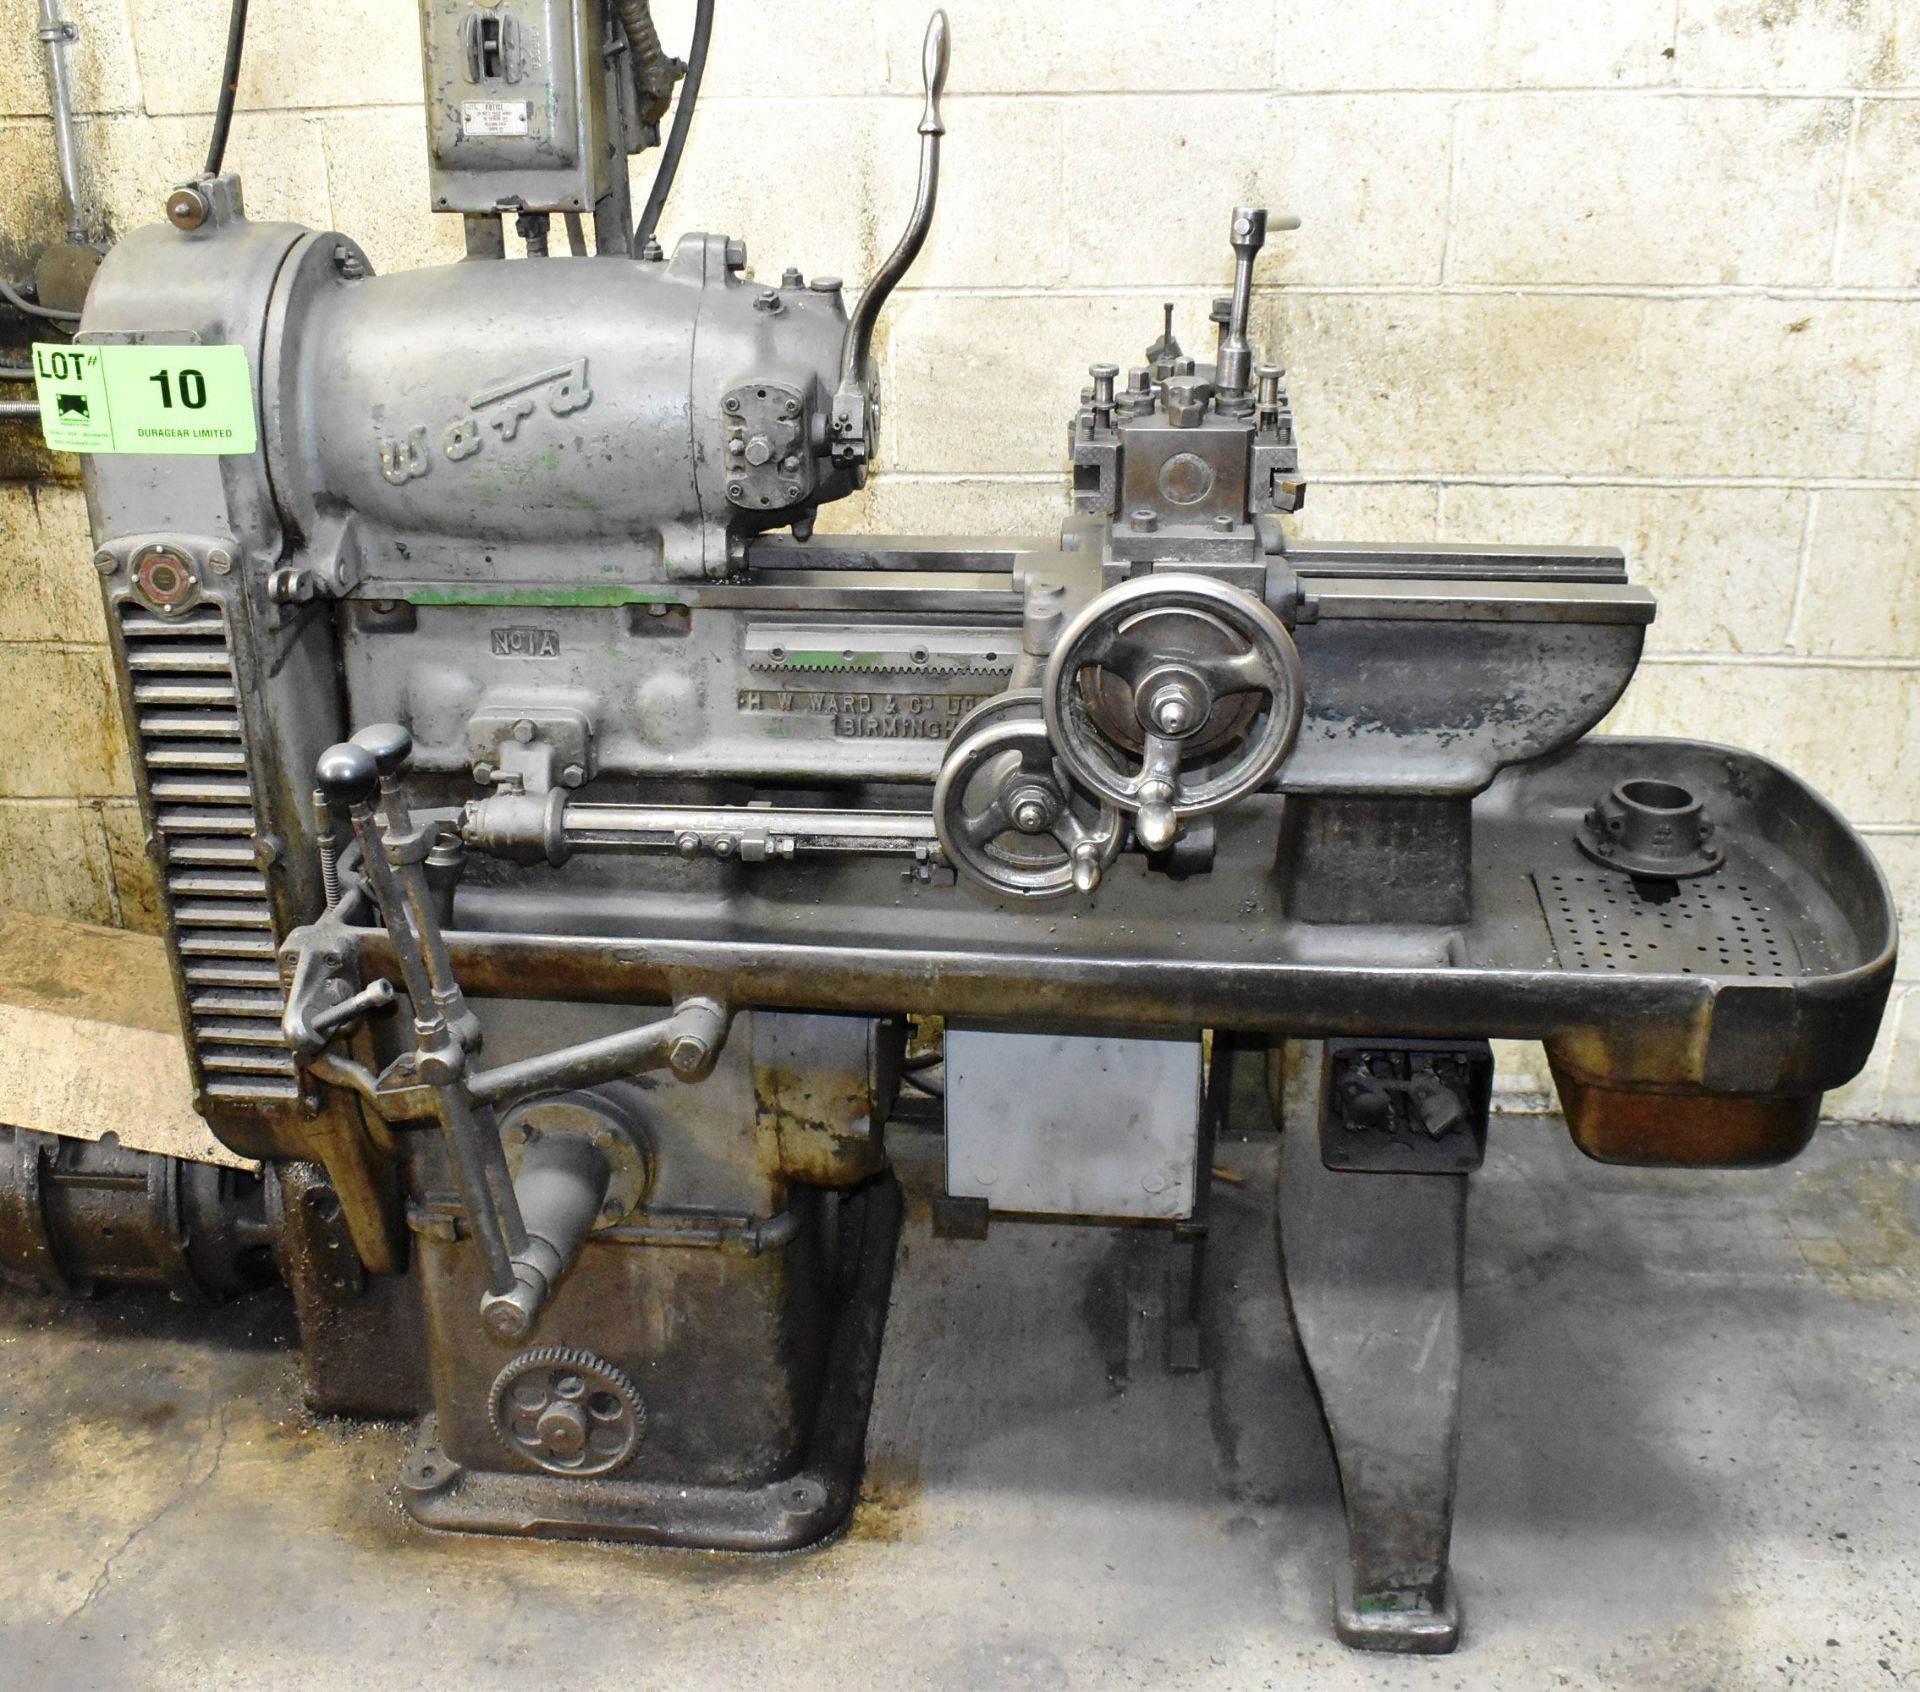 H.W. WARD NO.1A CHUCKING LATHE WITH, 10" SWING OVER BED, 1" BAR CAPACITY, 3" COLLET CHUCK, S/N N/ - Image 2 of 5